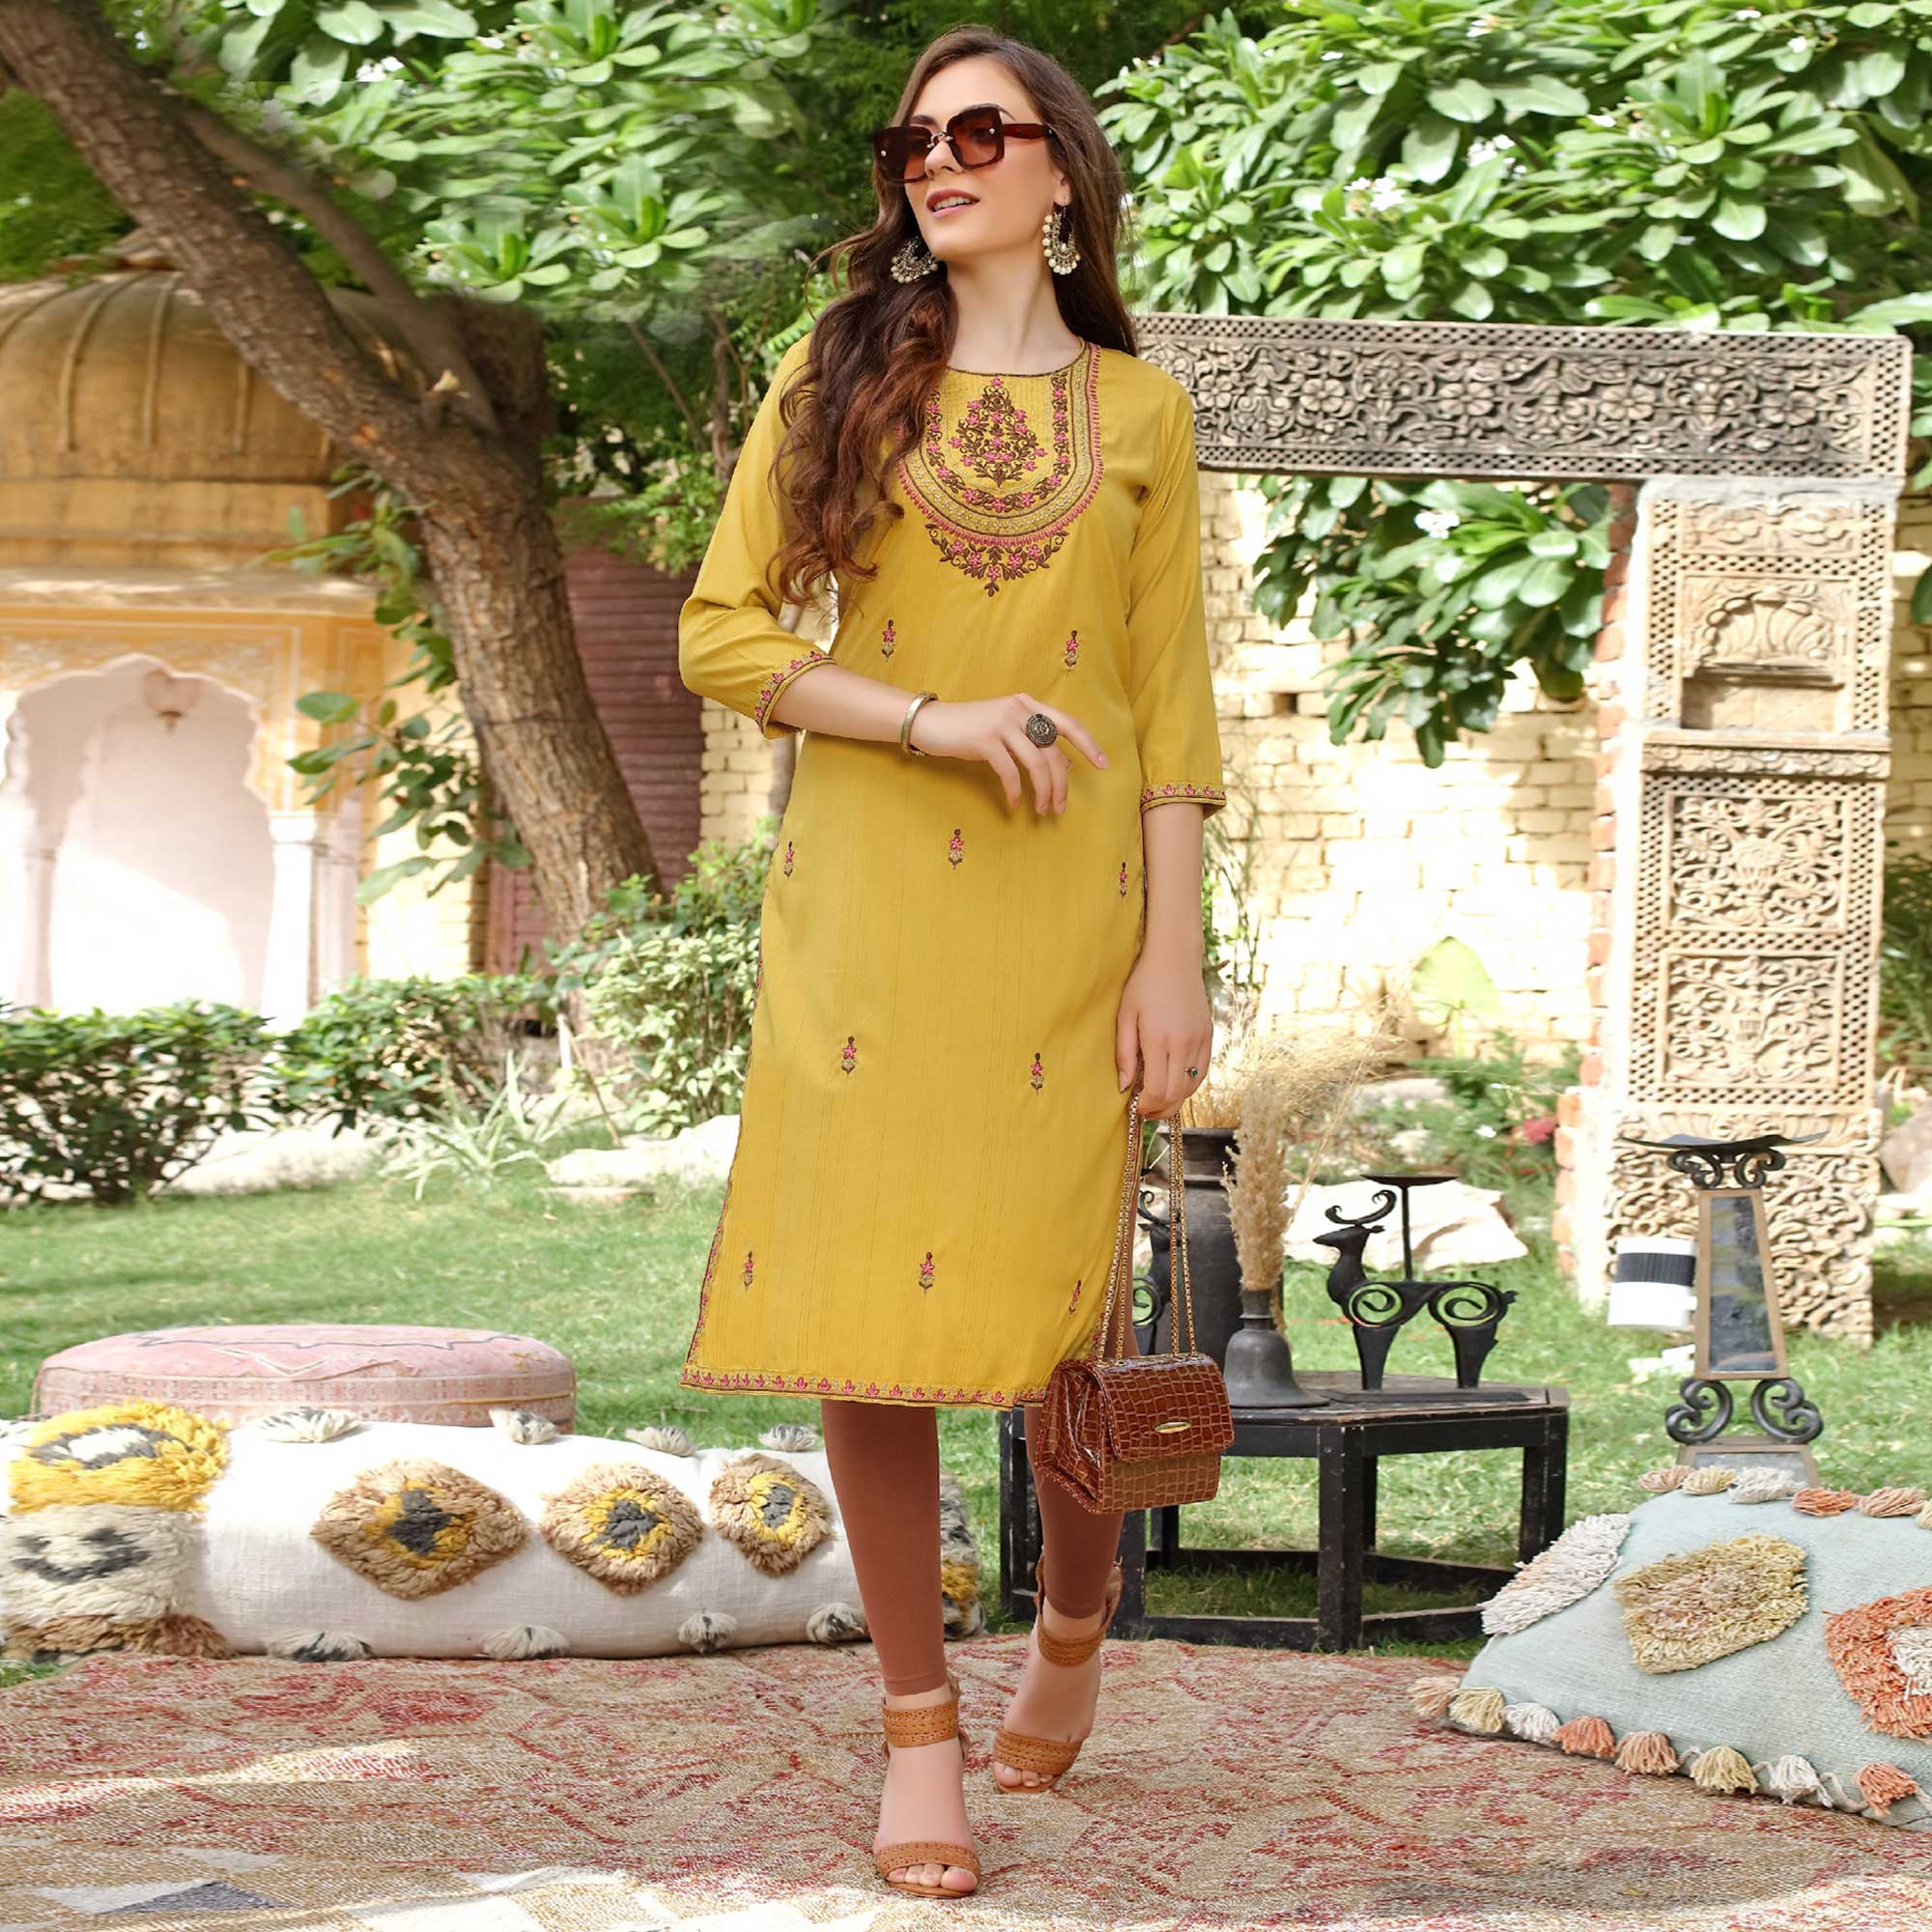 Buy FASHION QUEEN Women Yellow Embroidered Sequinned Silk Chiffon Kurti  with Trousers & Dupatta (Yellow_V-166) (X-Small) at Amazon.in